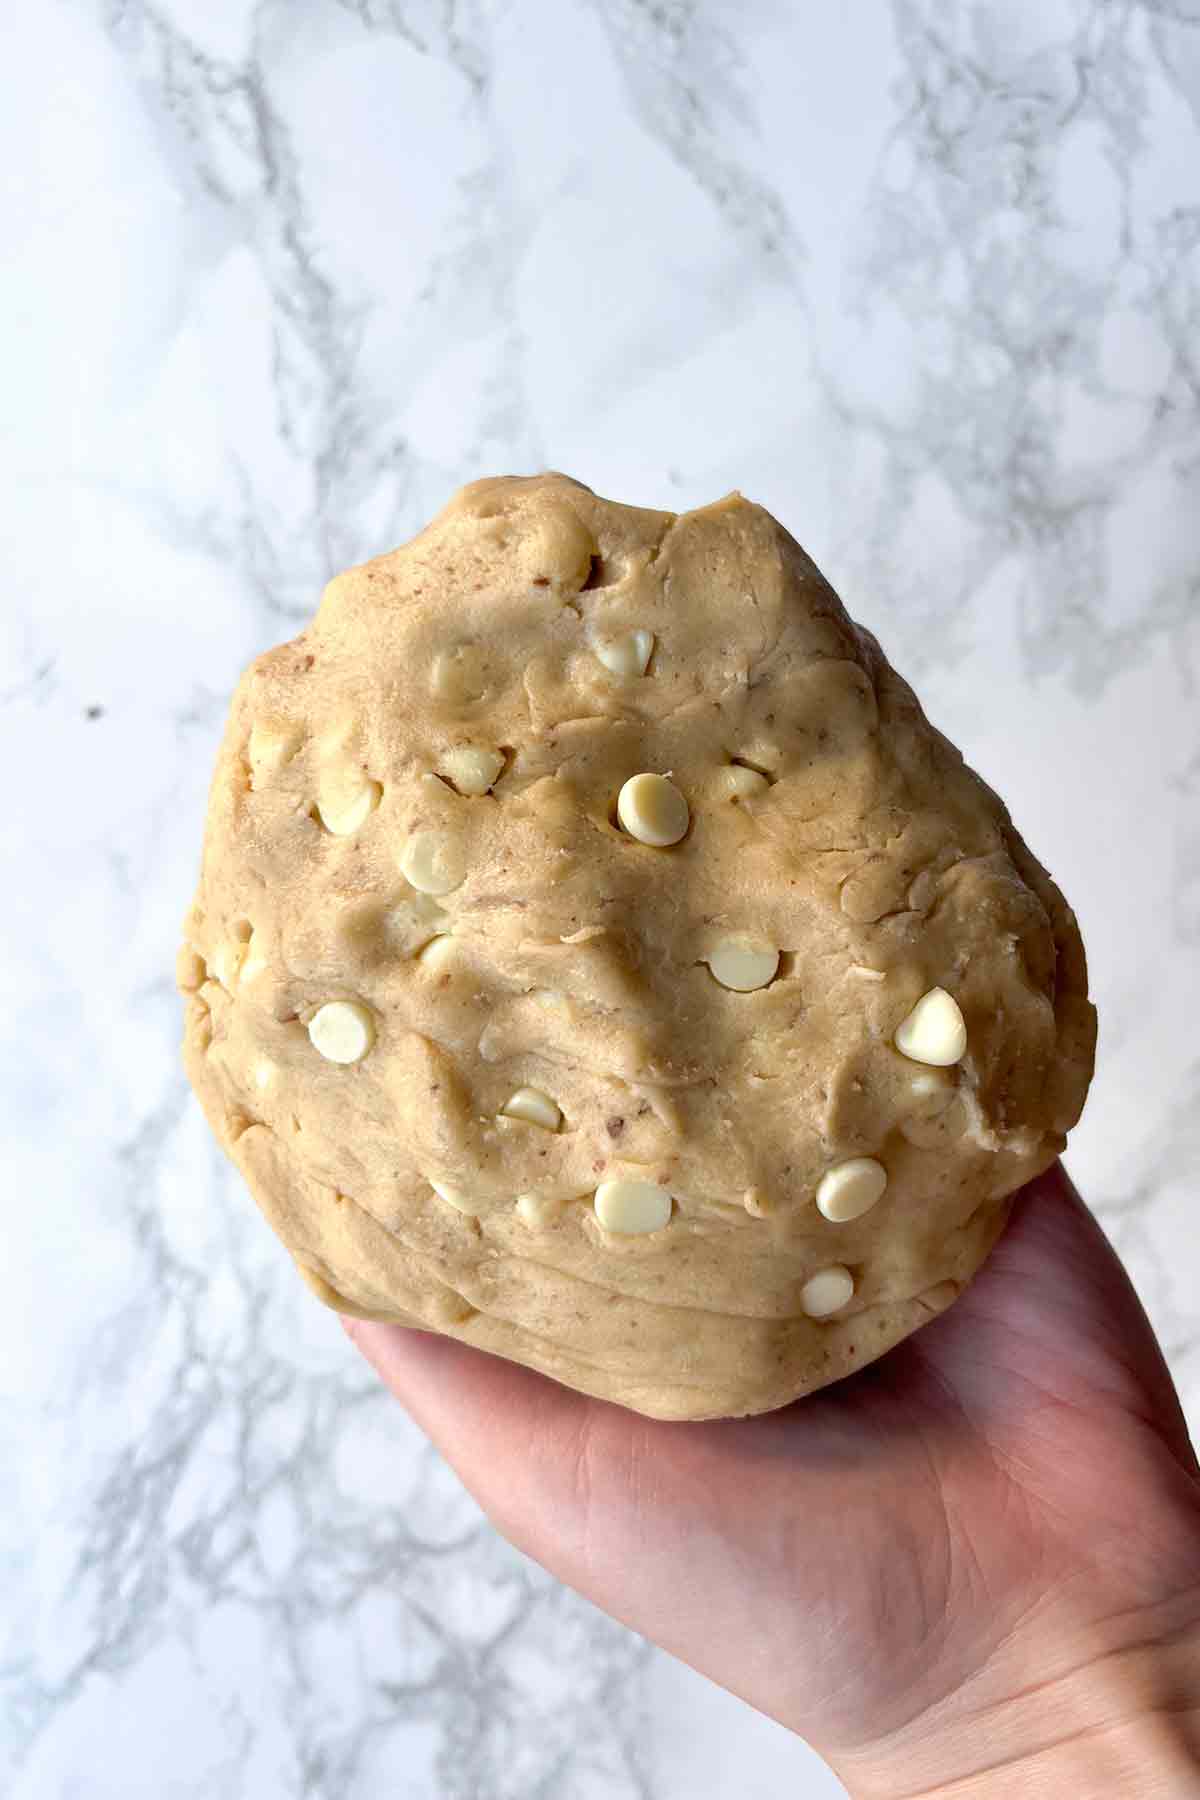 Ball Of Cookie Dough With White Chocolate Chips